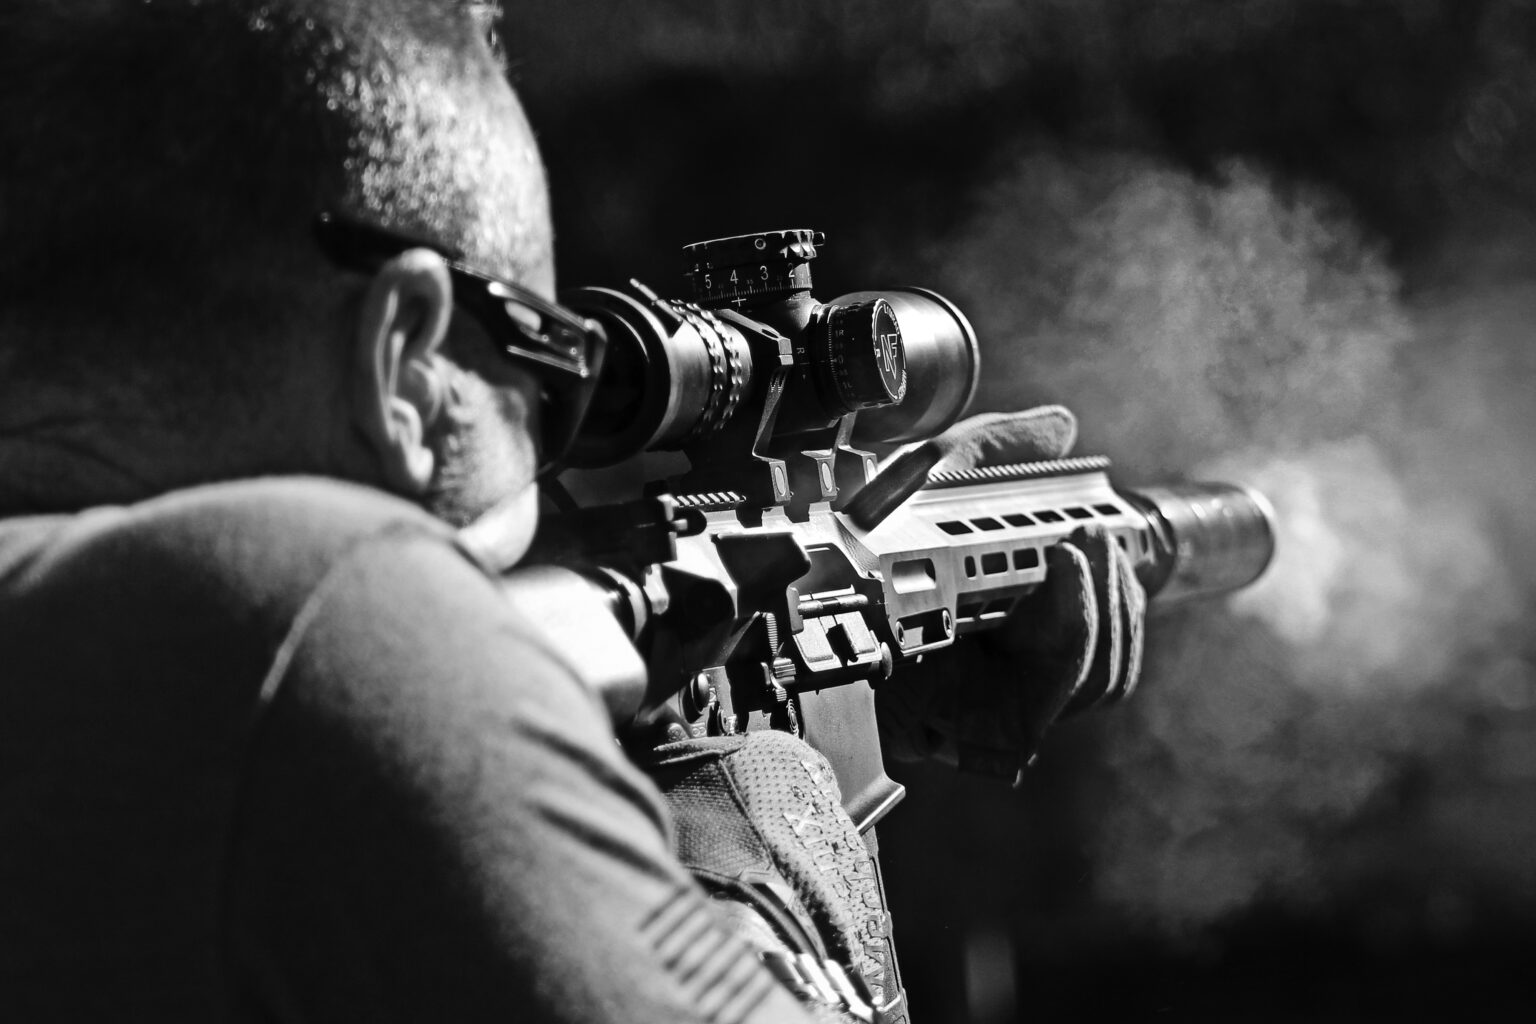 Black and white over-the-should view of man in sunglasses firing a high-powered automatic rifle.